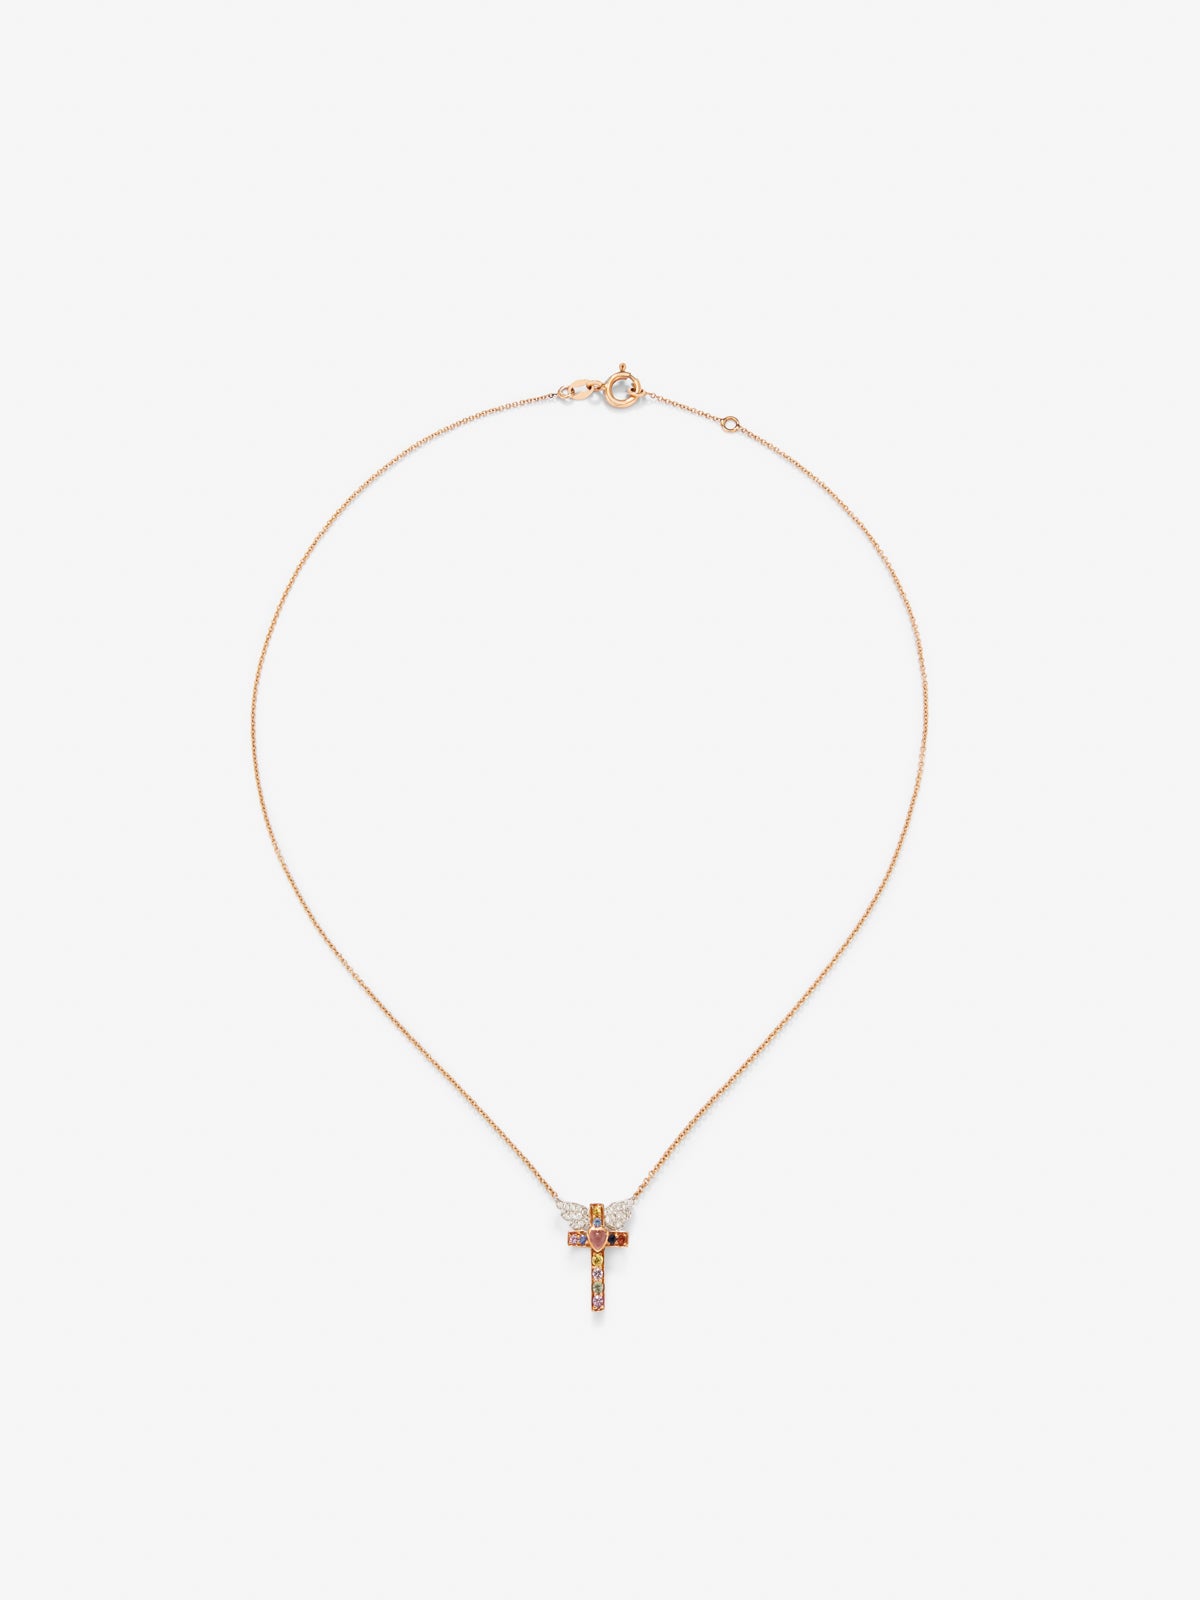 18K Rose Gold Cross Pendant Chain with Sapphire and Diamond.